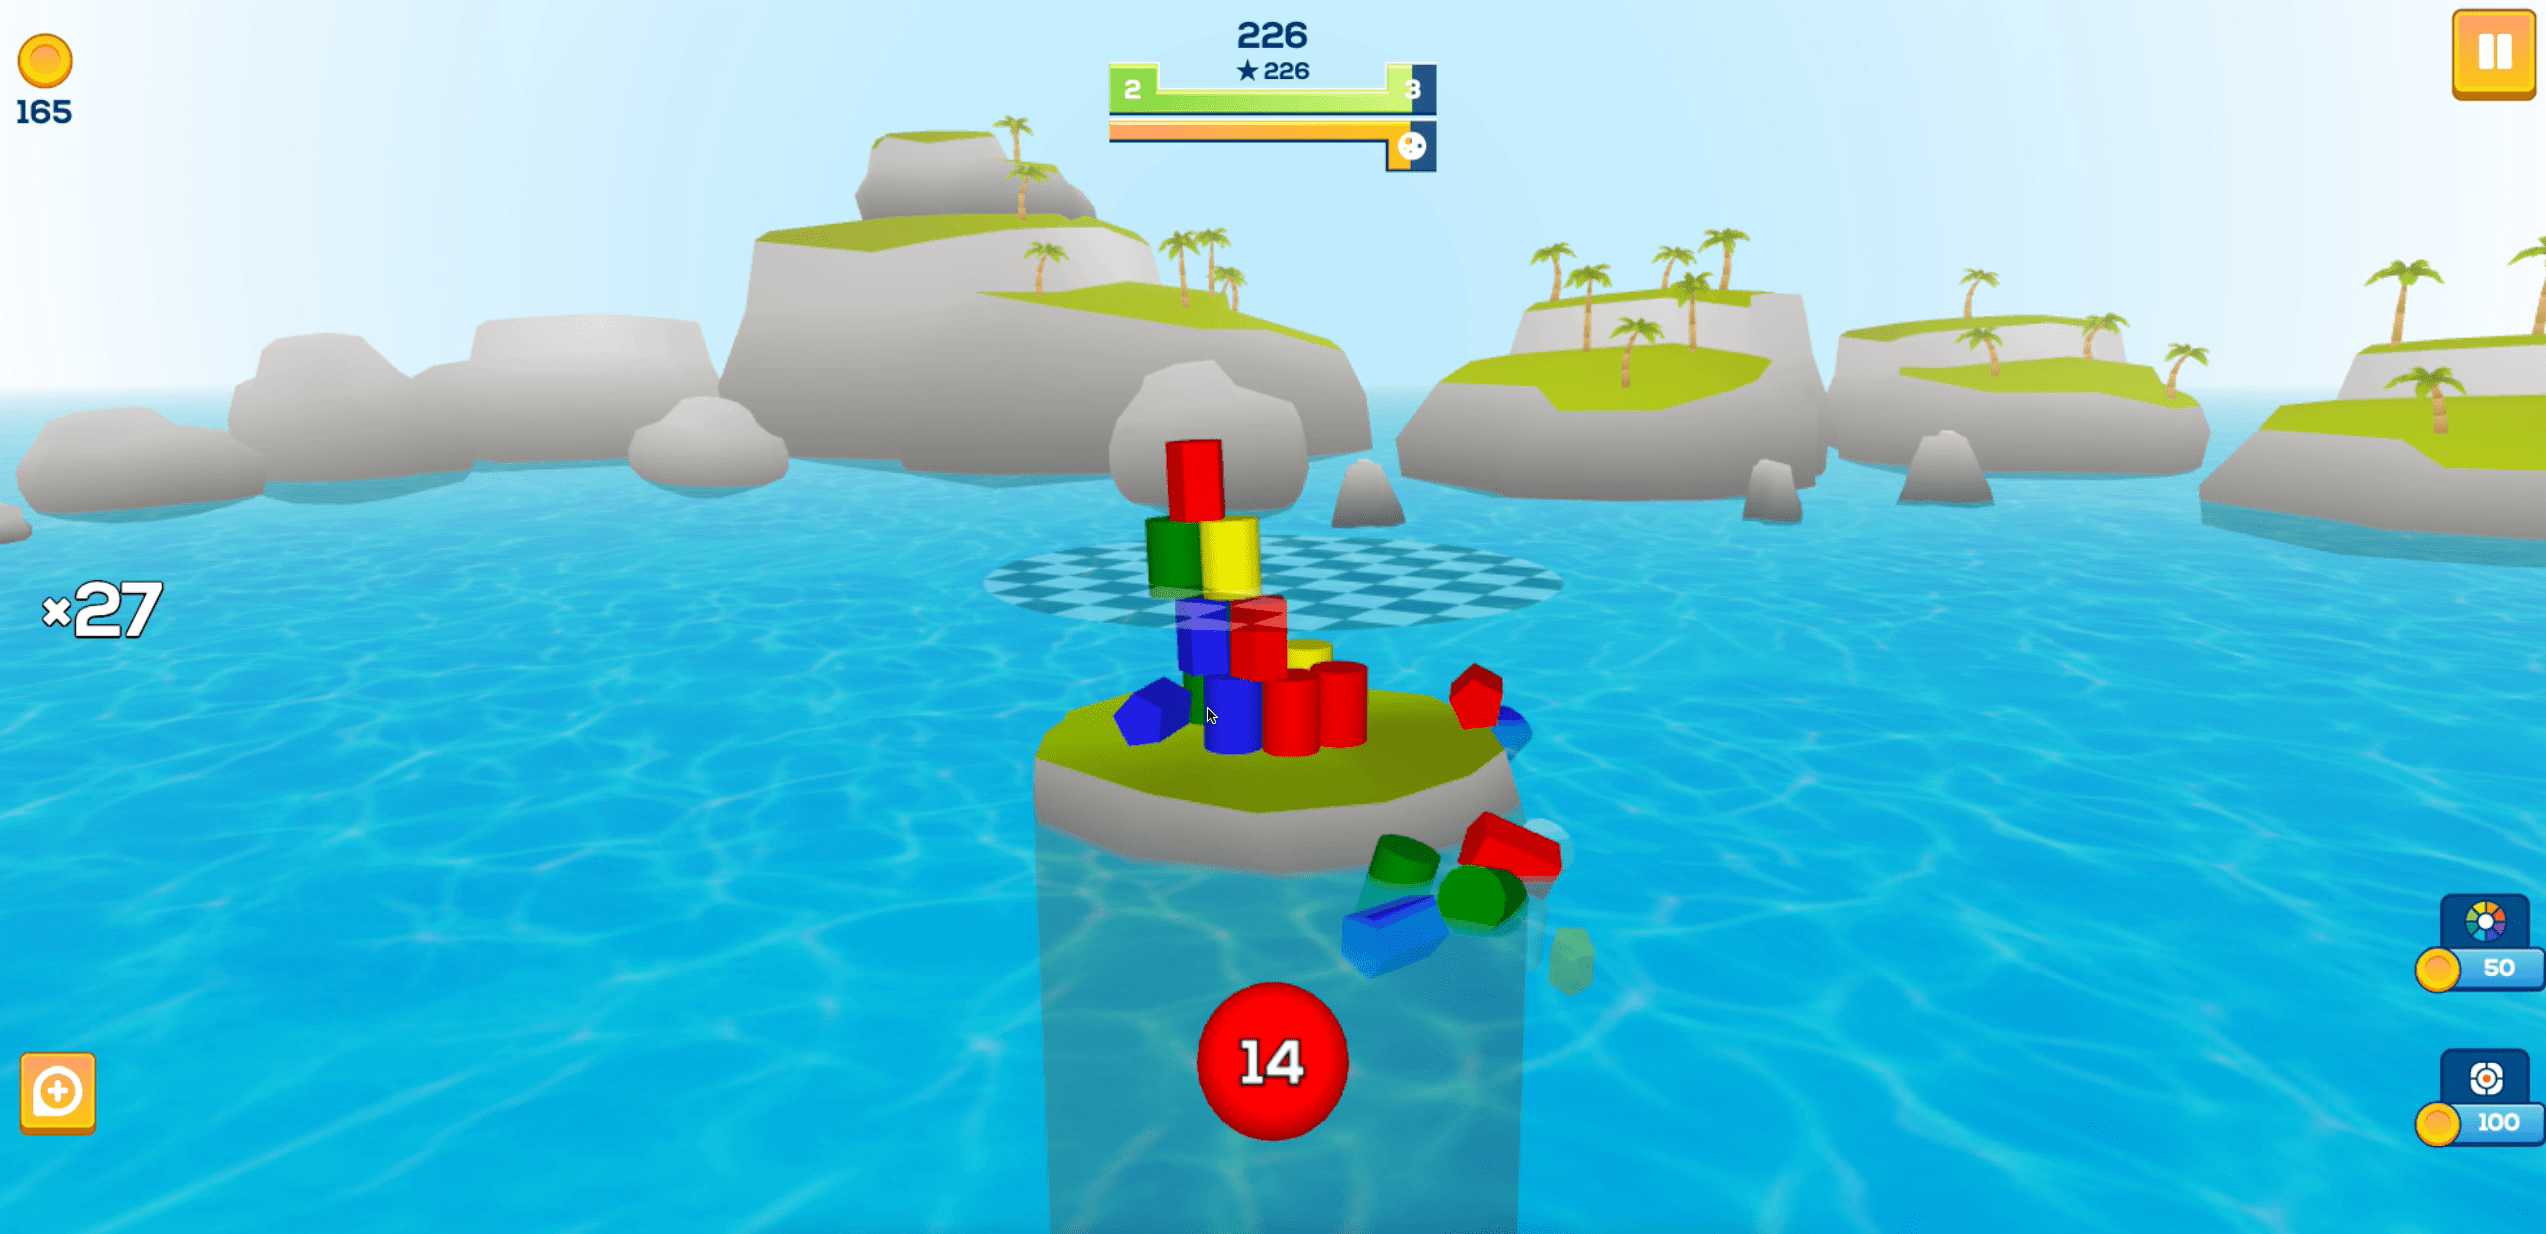 Tower of Colors: Island Edition Screenshot 2